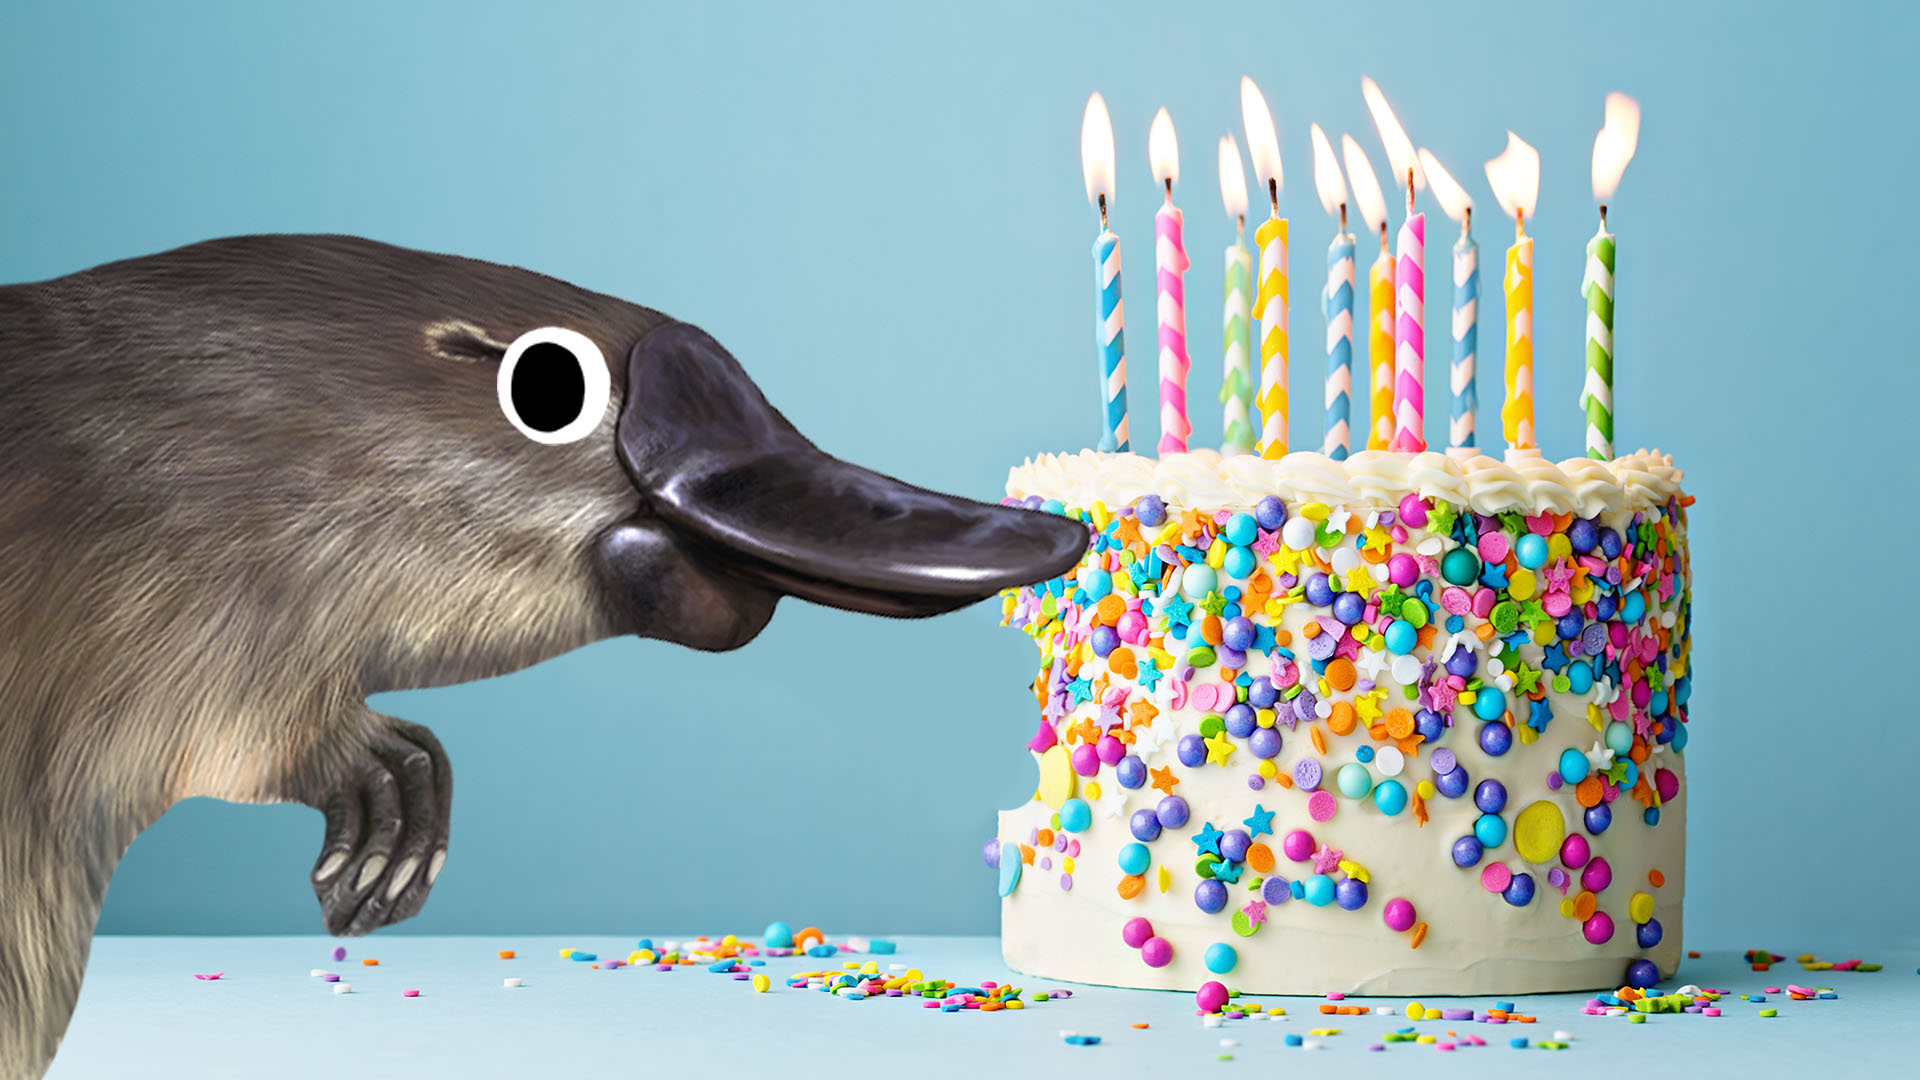 A platypus eating a birthday cake